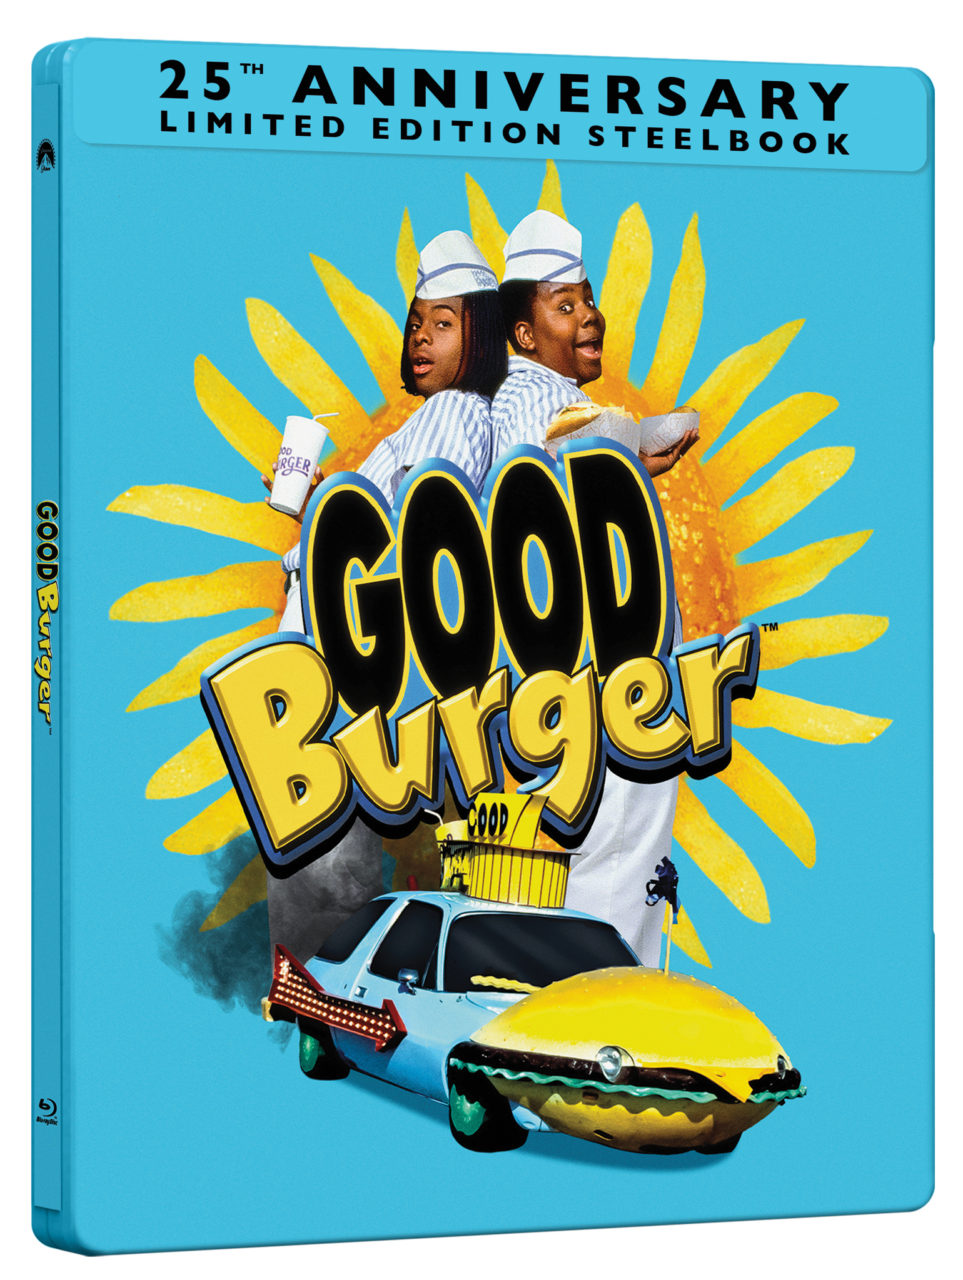 Good Burger 25th Anniversary Limited Edition Steelbook cover (Paramount Home Entertainment)